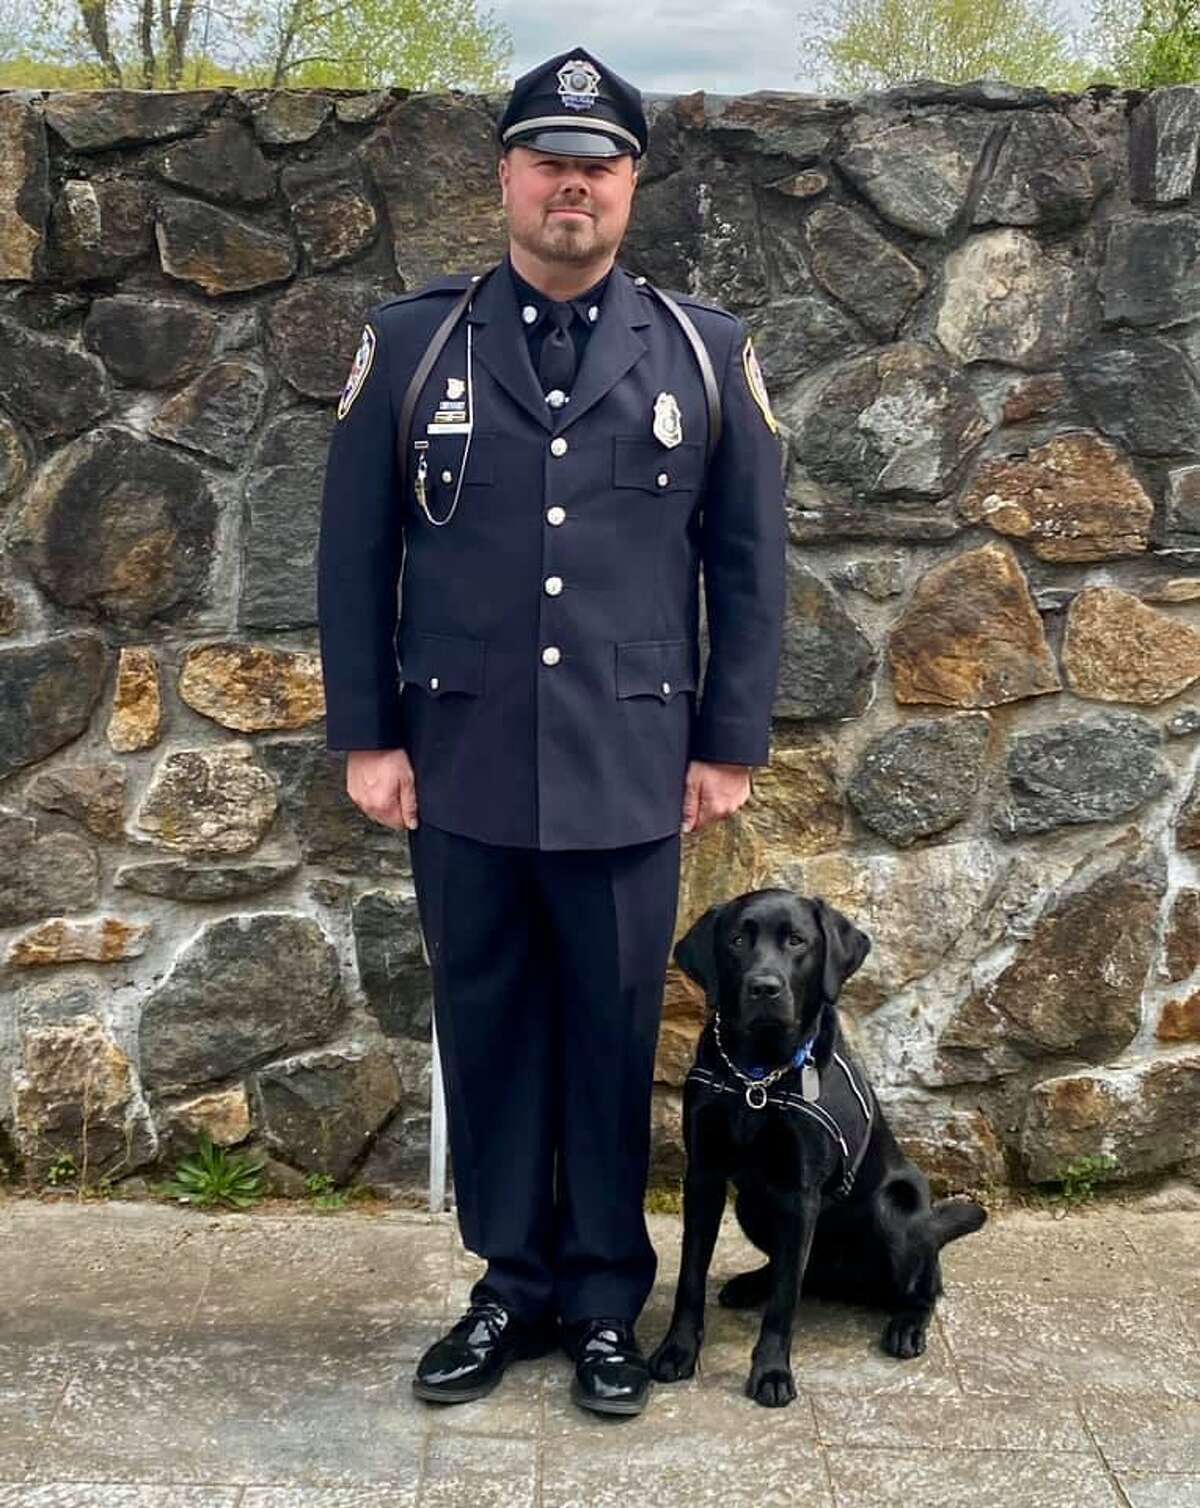 Pictured is Middletown Police Department Officer Jay Bodell and new K-9, Bear. Contributed by Middletown Police Facebook Page.